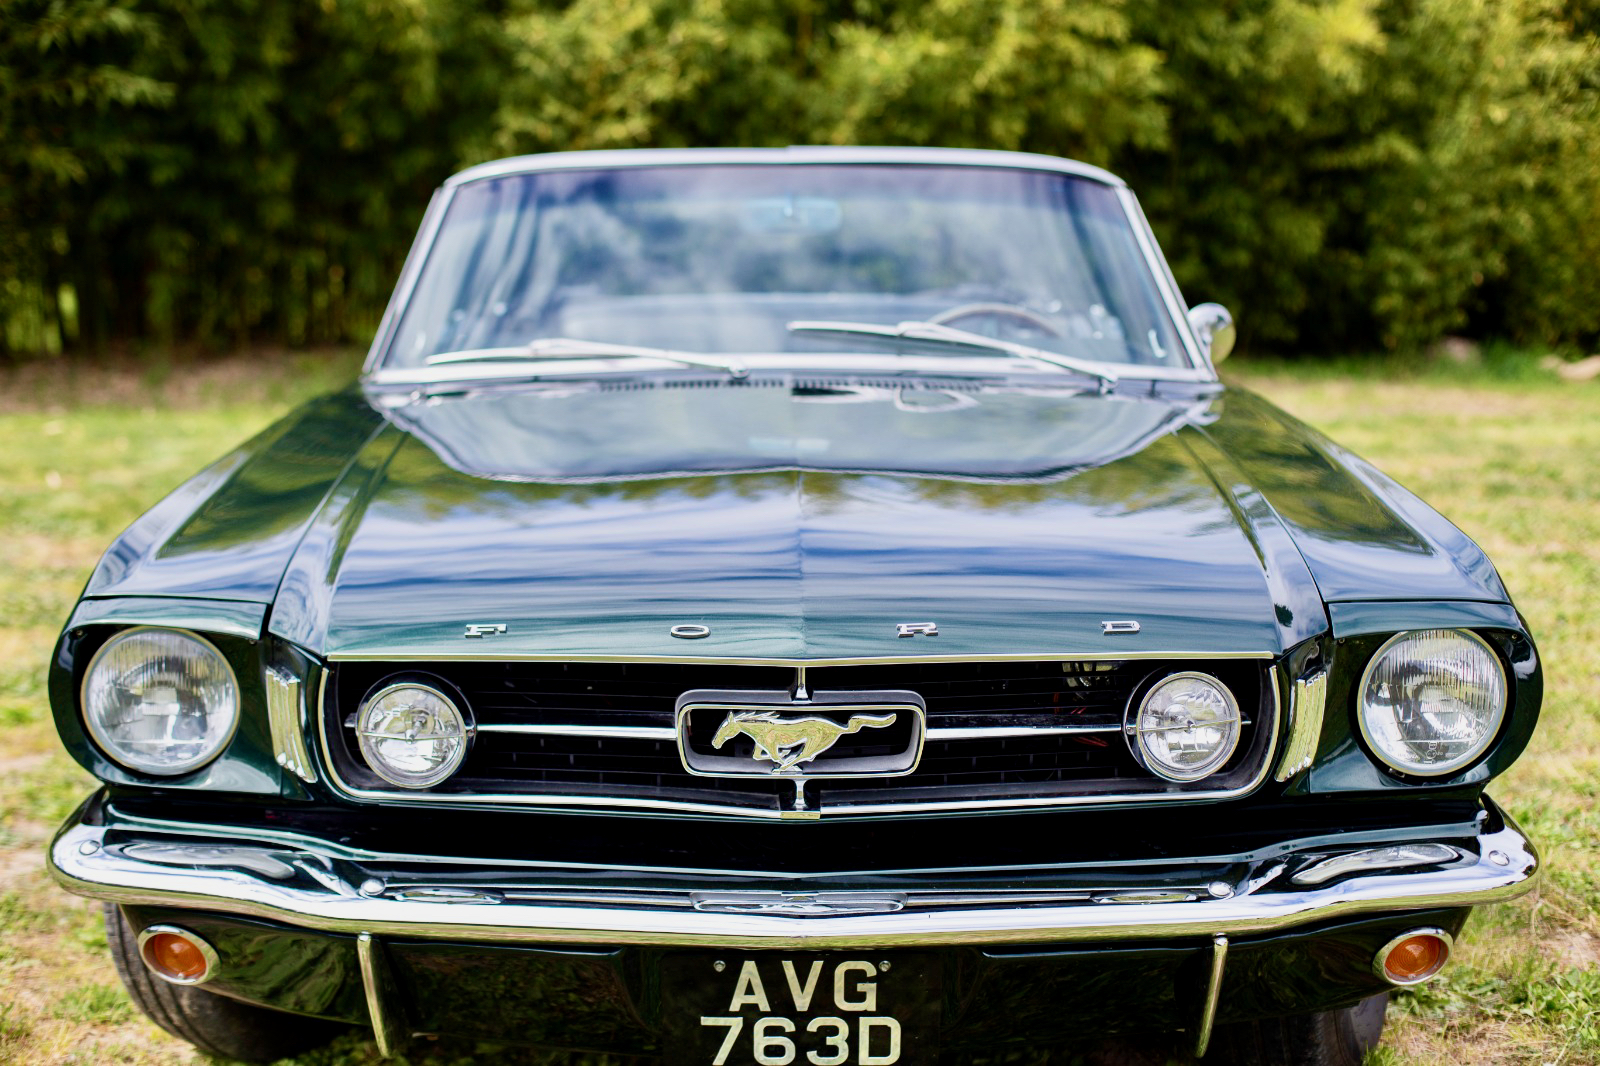 A view of the Provence Classics 1966 Ford Mustang